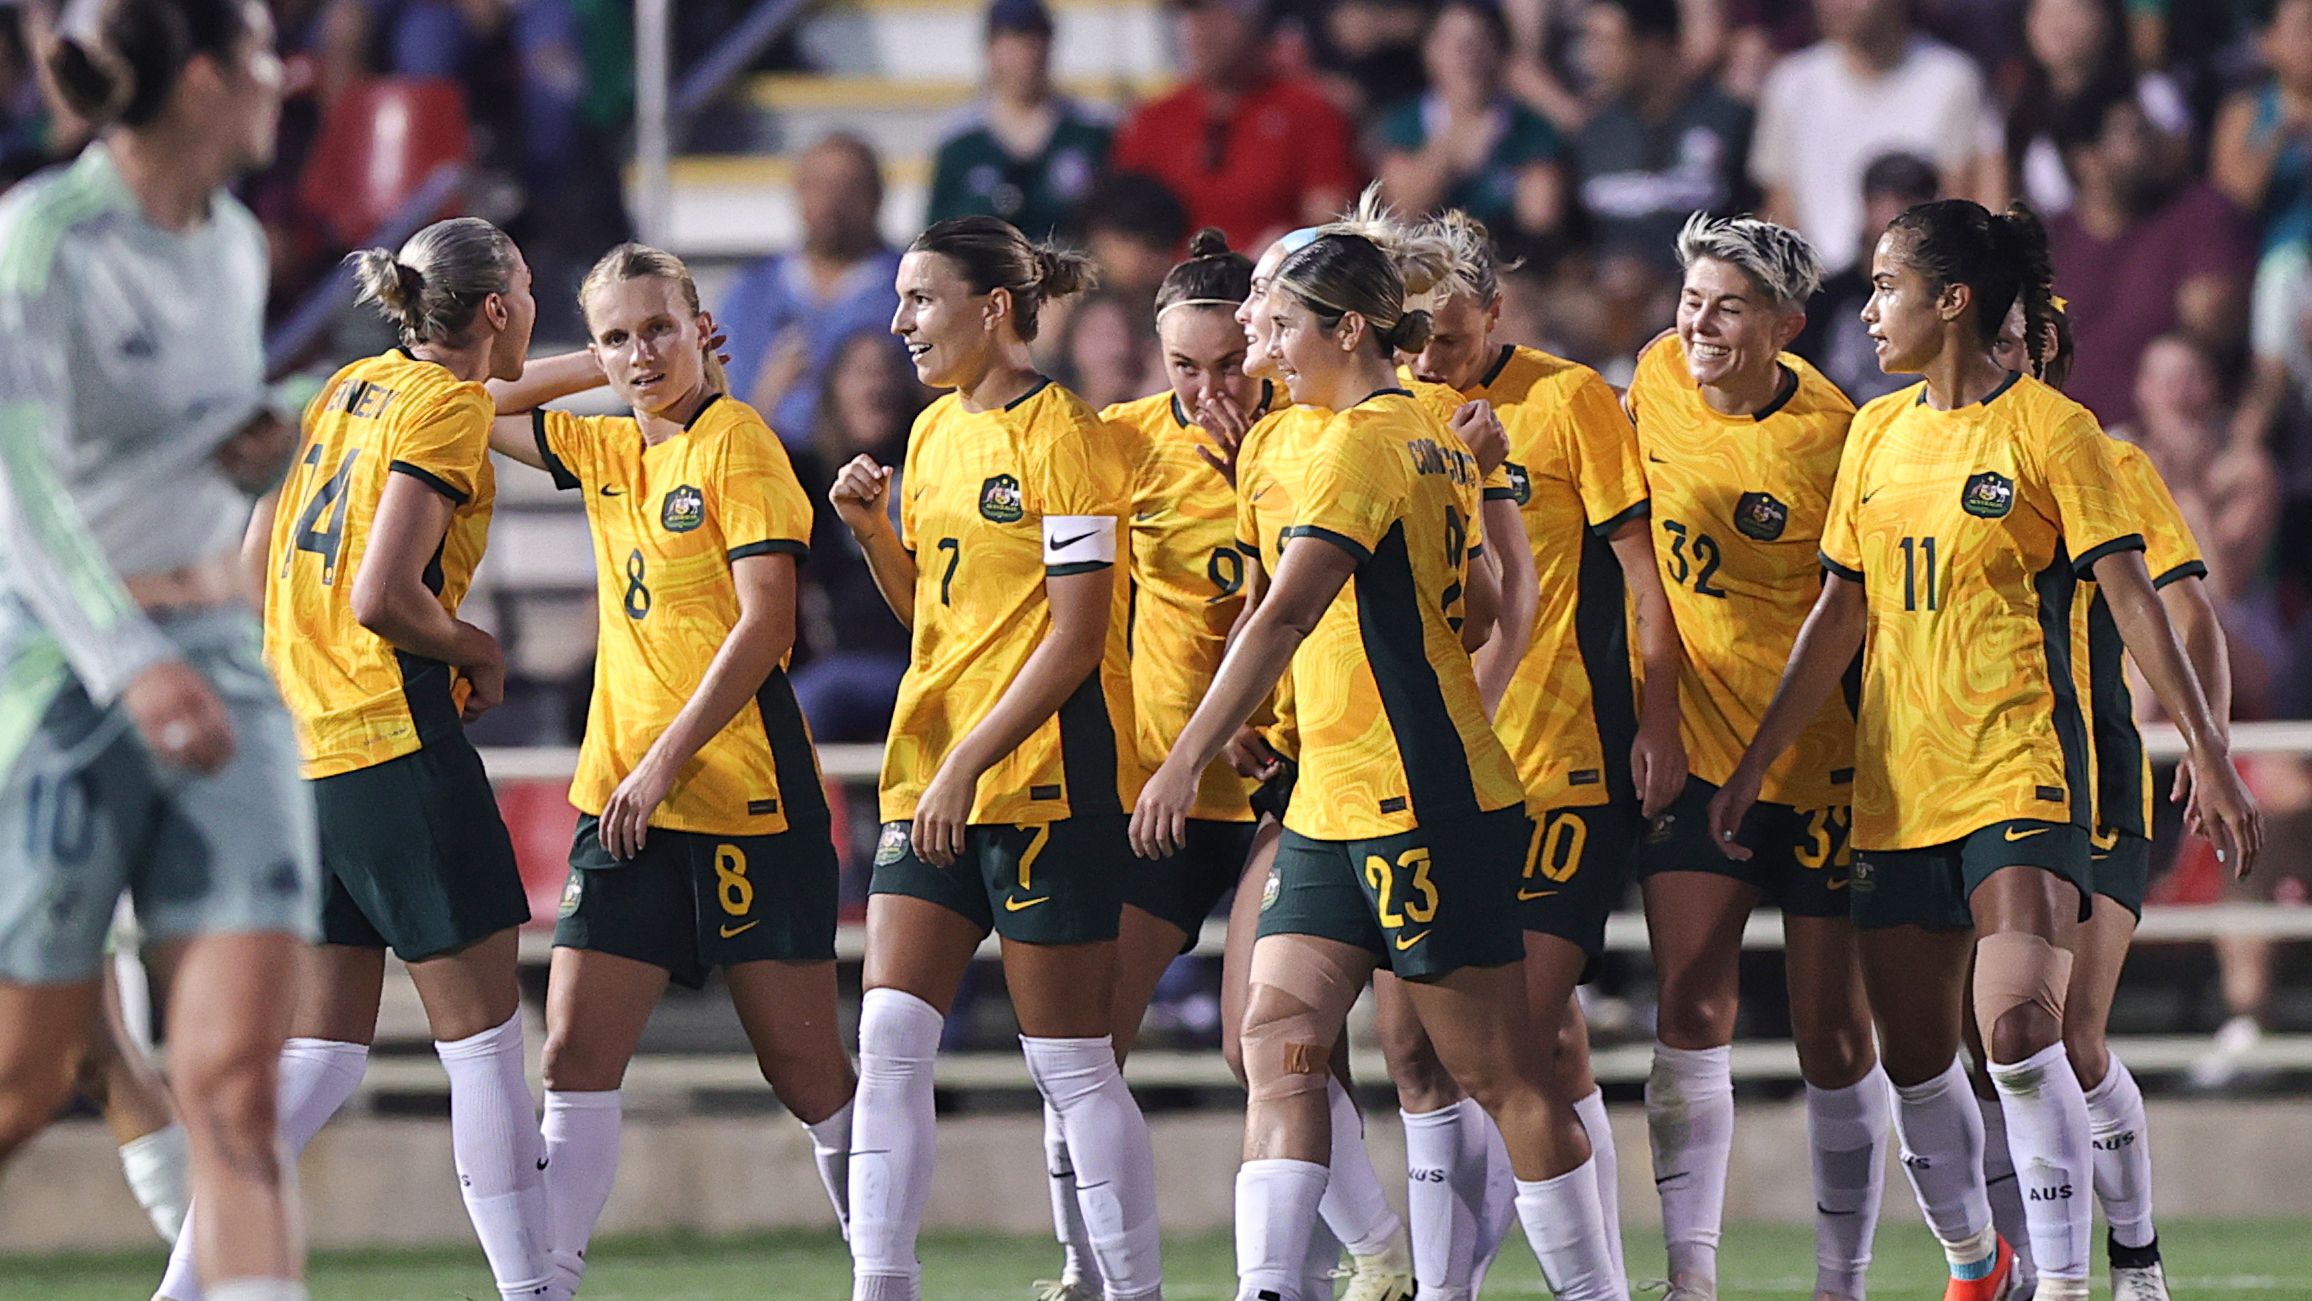 Matilda&#x27;s teammates after Caitlin Ford&#x27;s goal against Mexico. (Photo by Omar Vega/Getty Images)